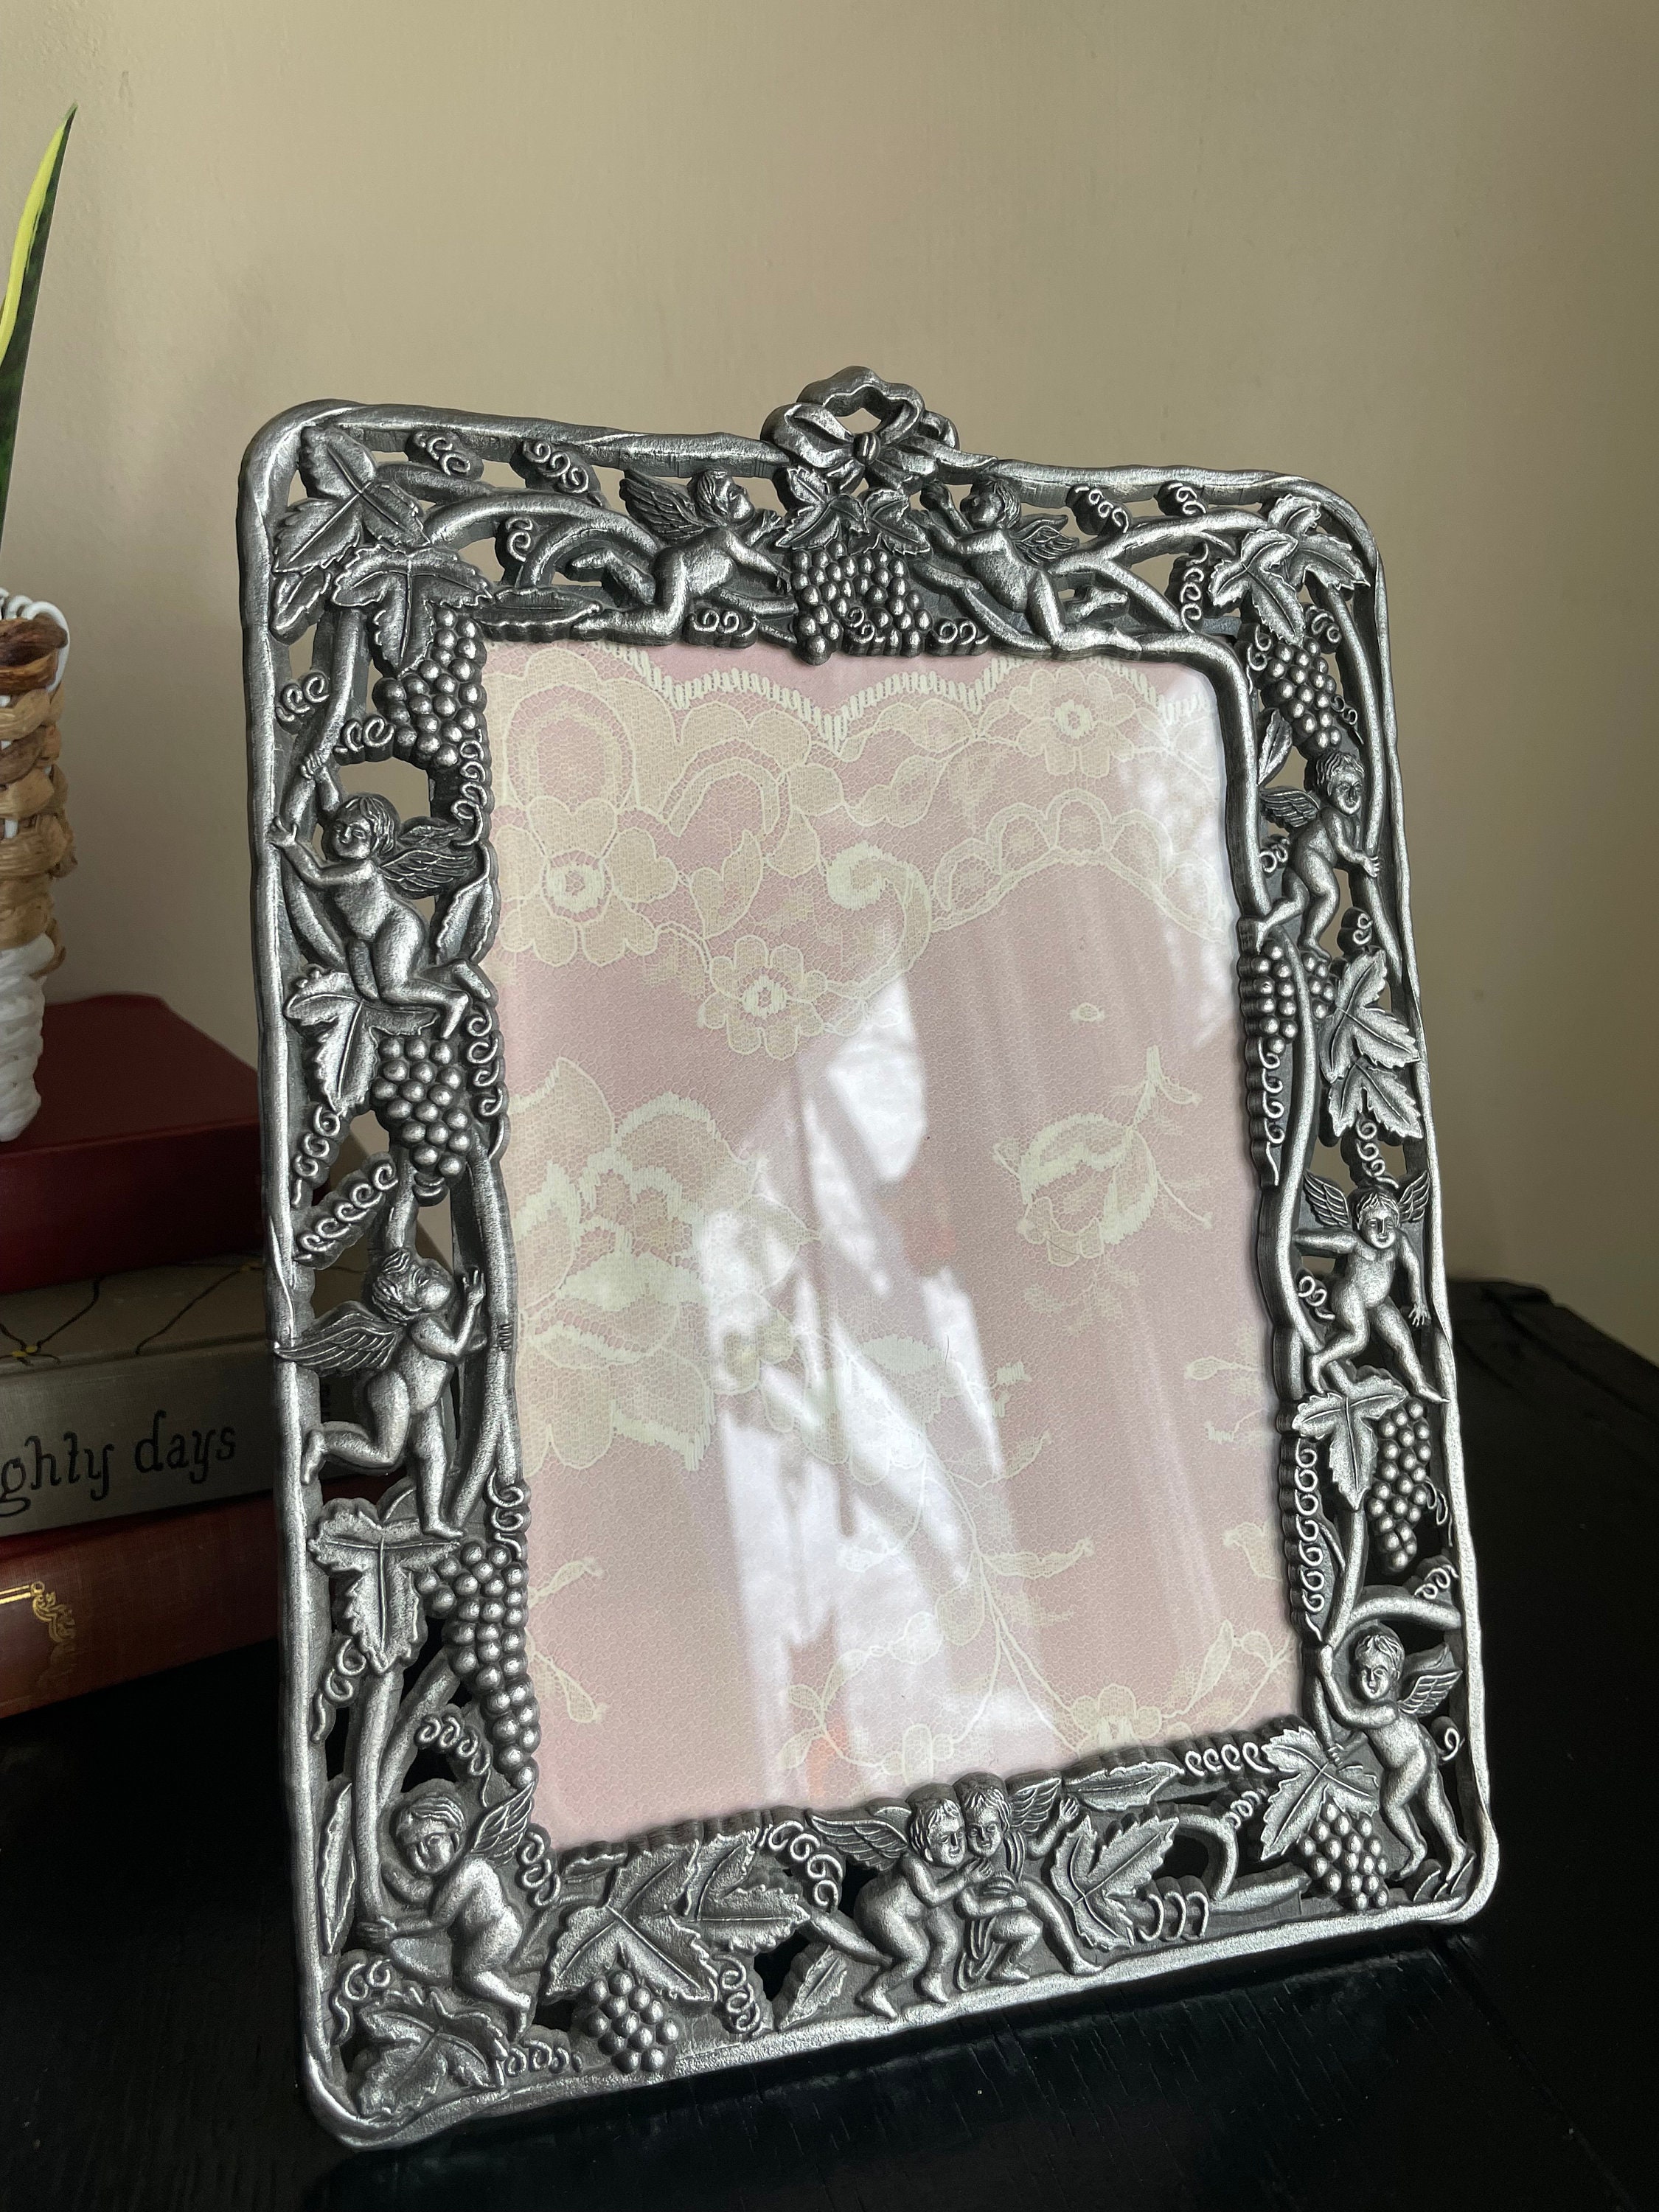 Vintage Silver Plate Picture Frame Victorian Style Ornate Frame Easel Back Antique Silver Baroque Photo Frame Raised Spoon 5x7 Frame 70s 80s